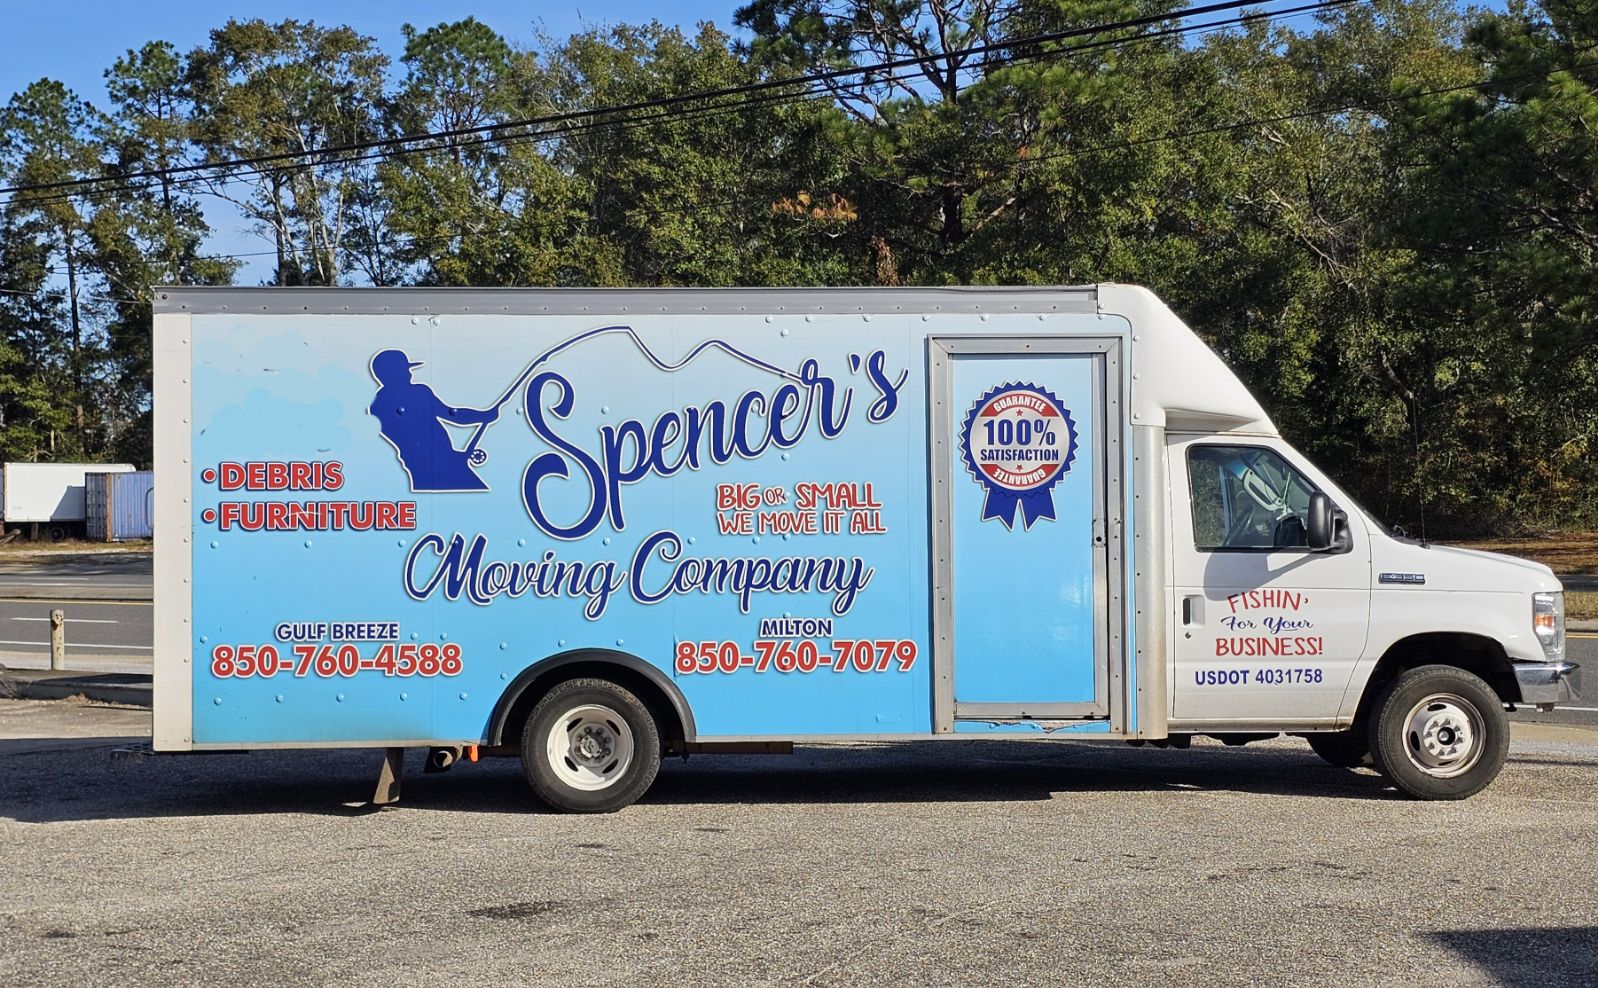 Spencer's Moving Company Niceville